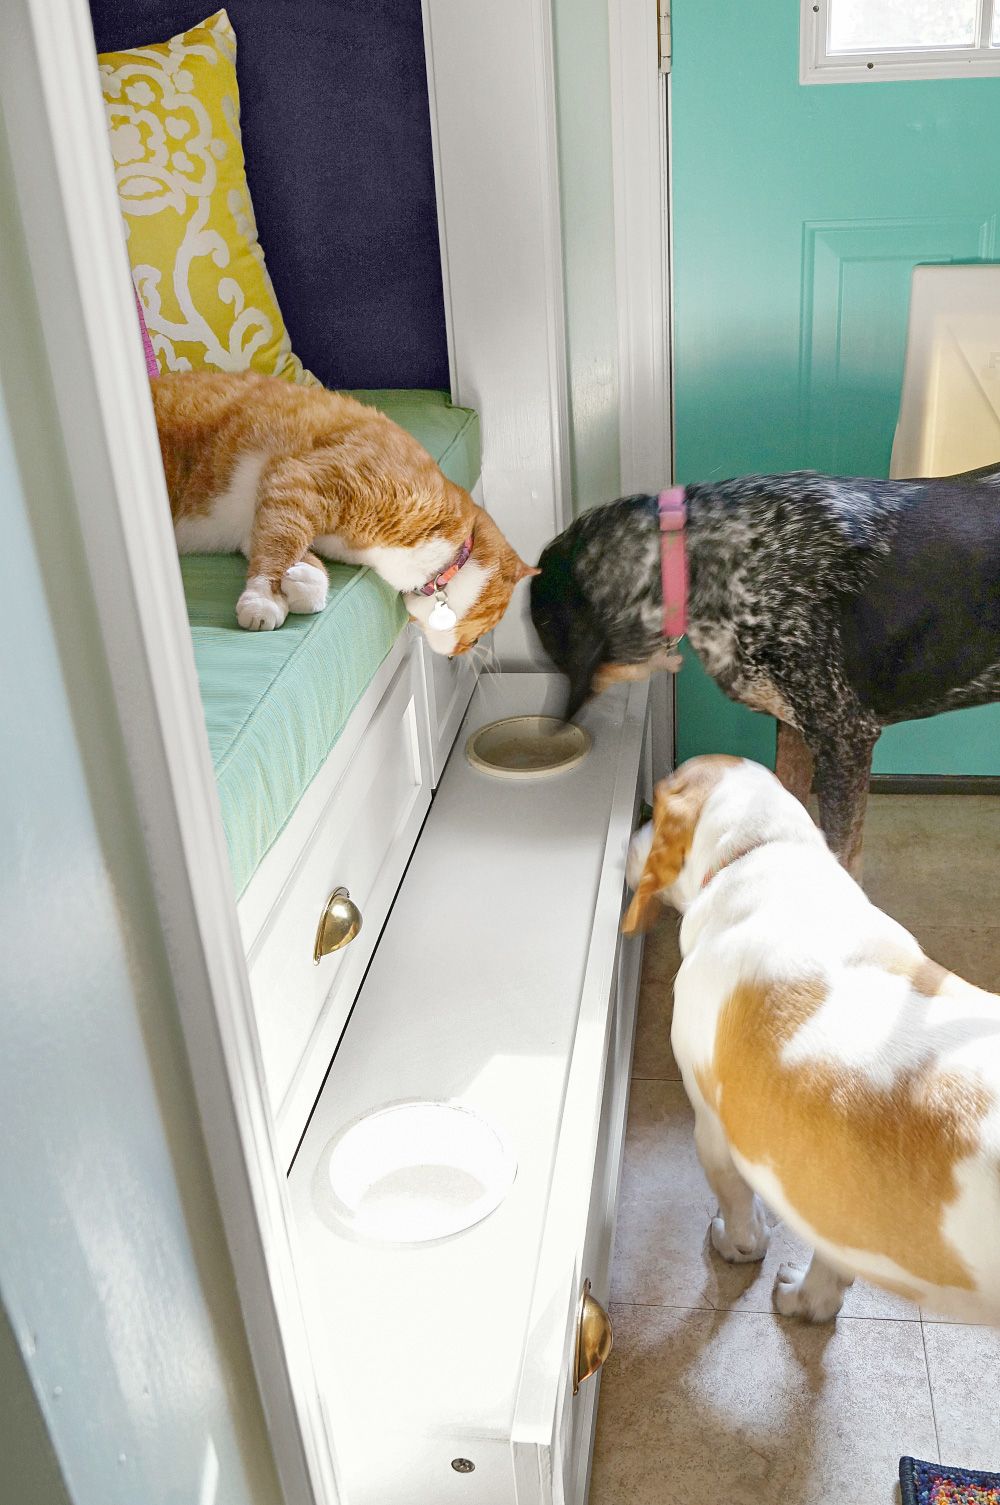 Turn A Dresser Into A Pet Feeding and Care Station: Easy DIY